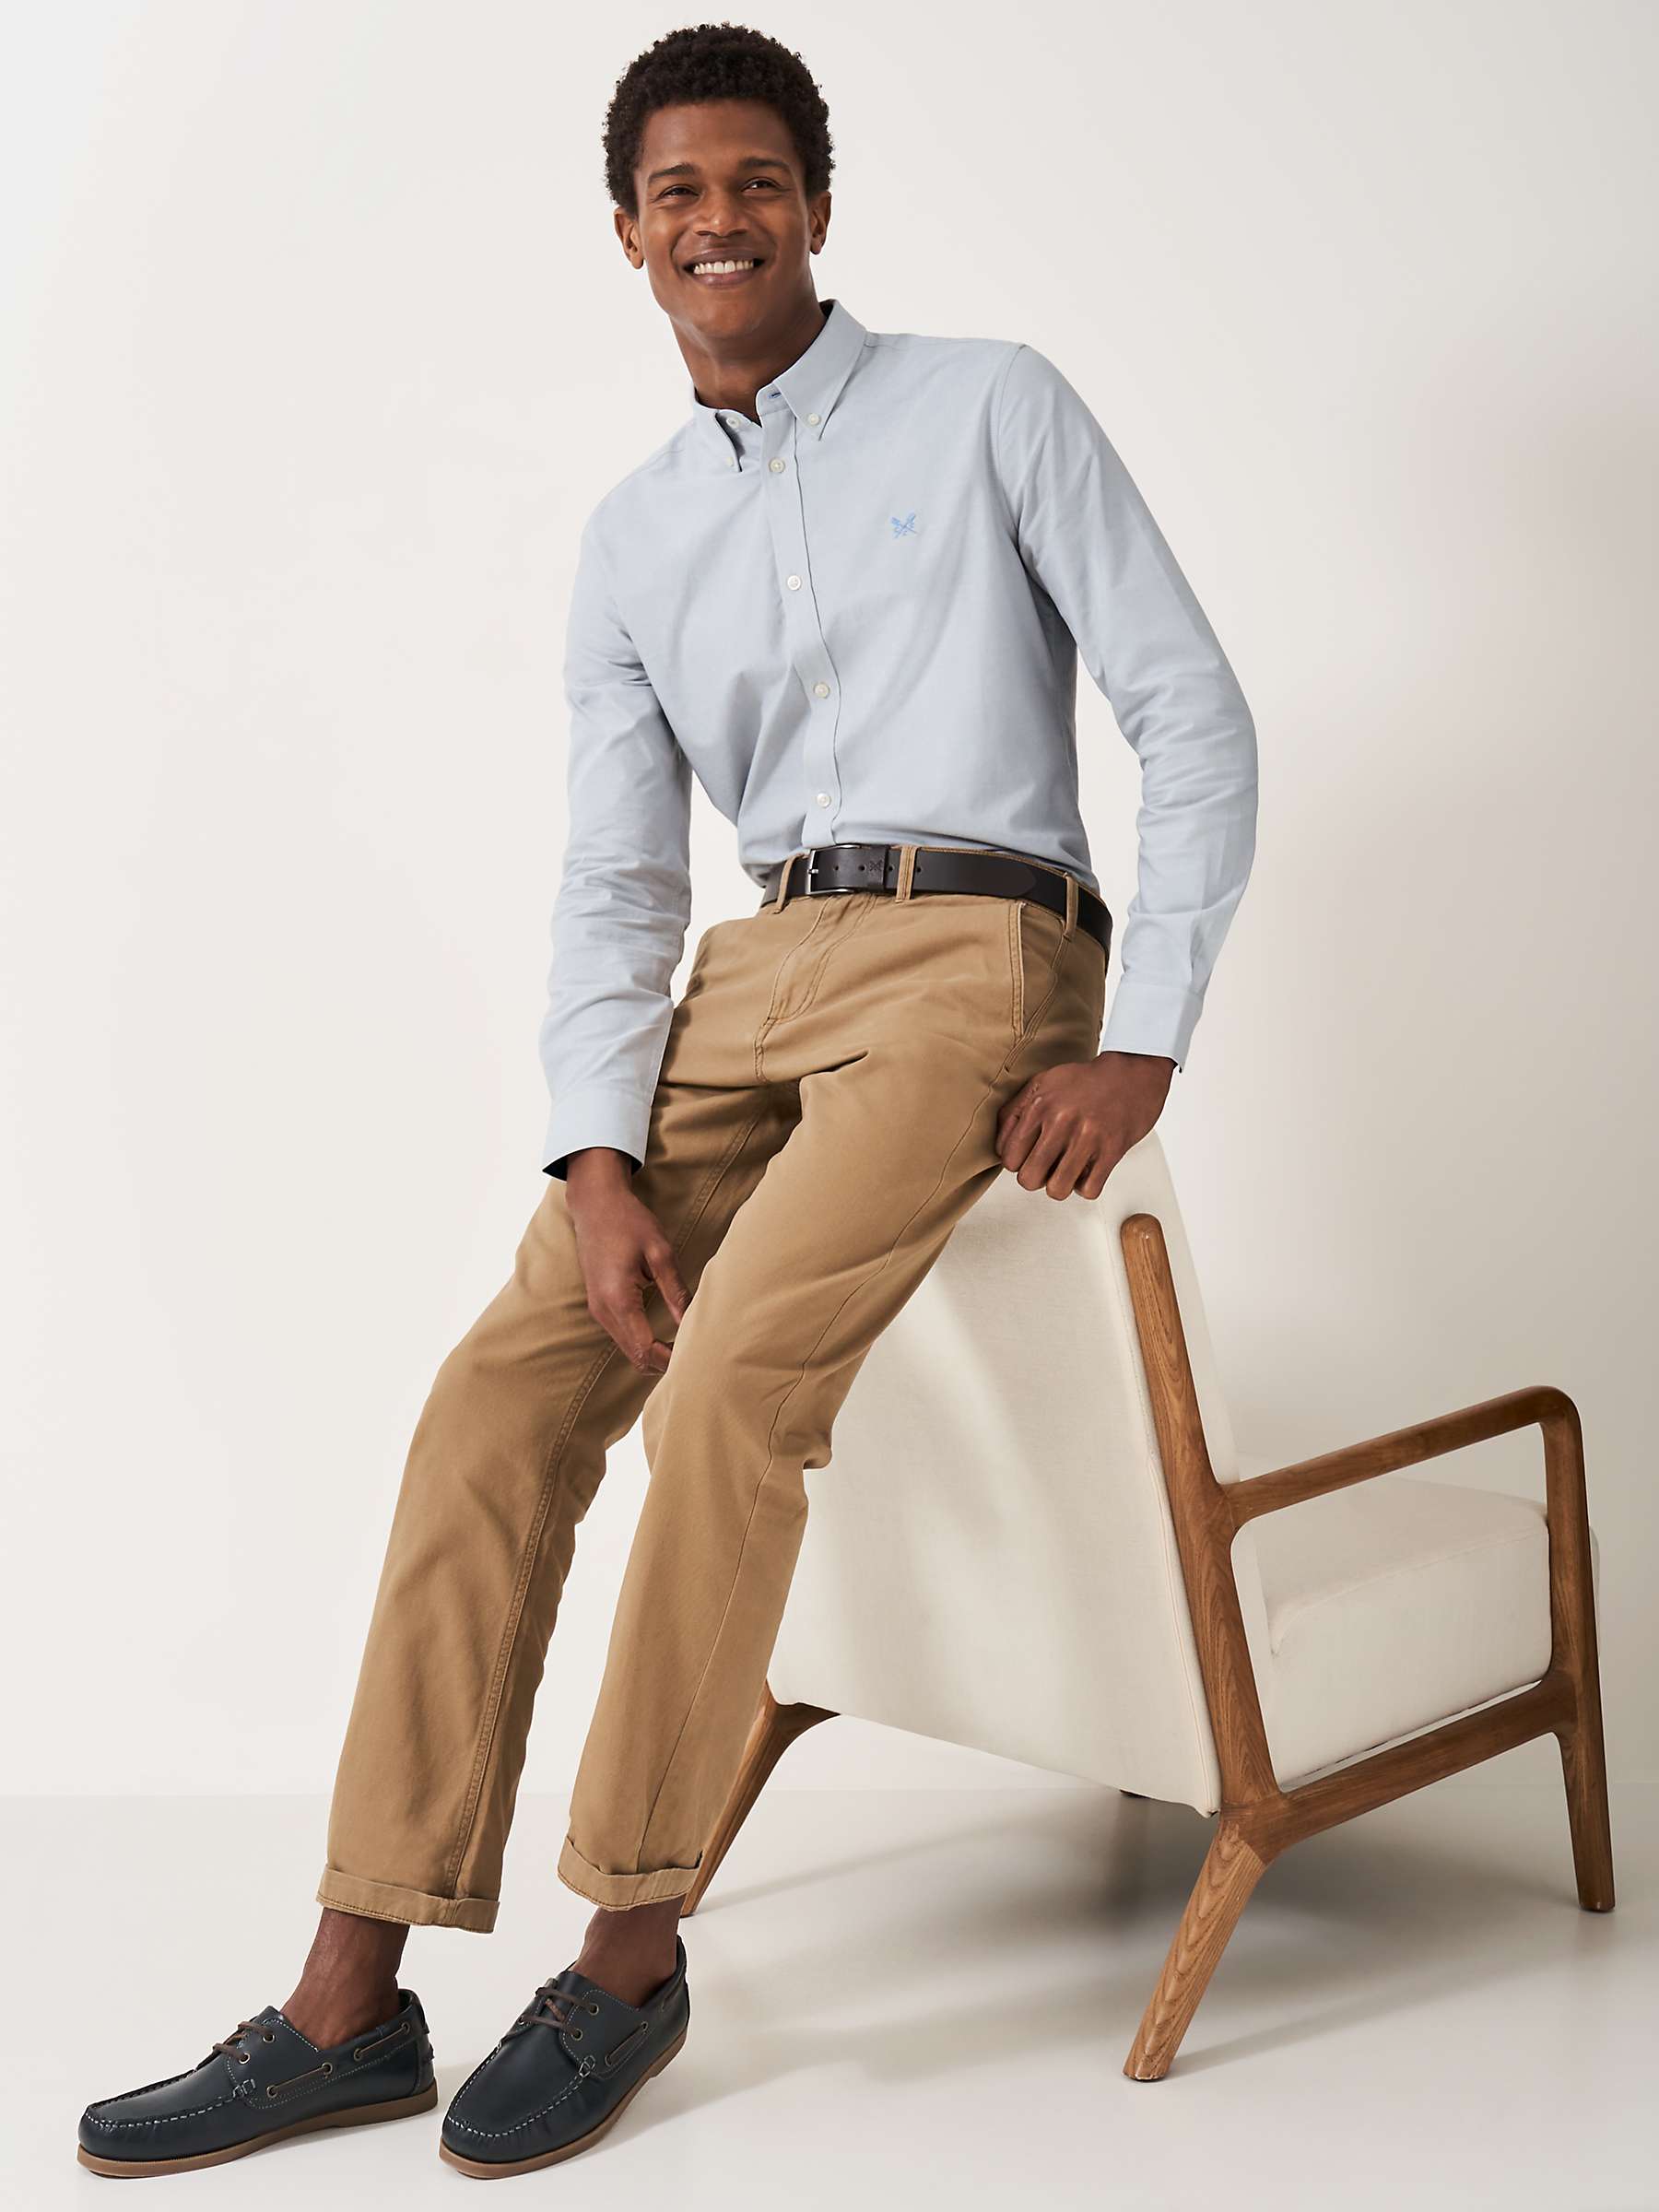 Buy Crew Clothing Oxford Cotton Shirt Online at johnlewis.com